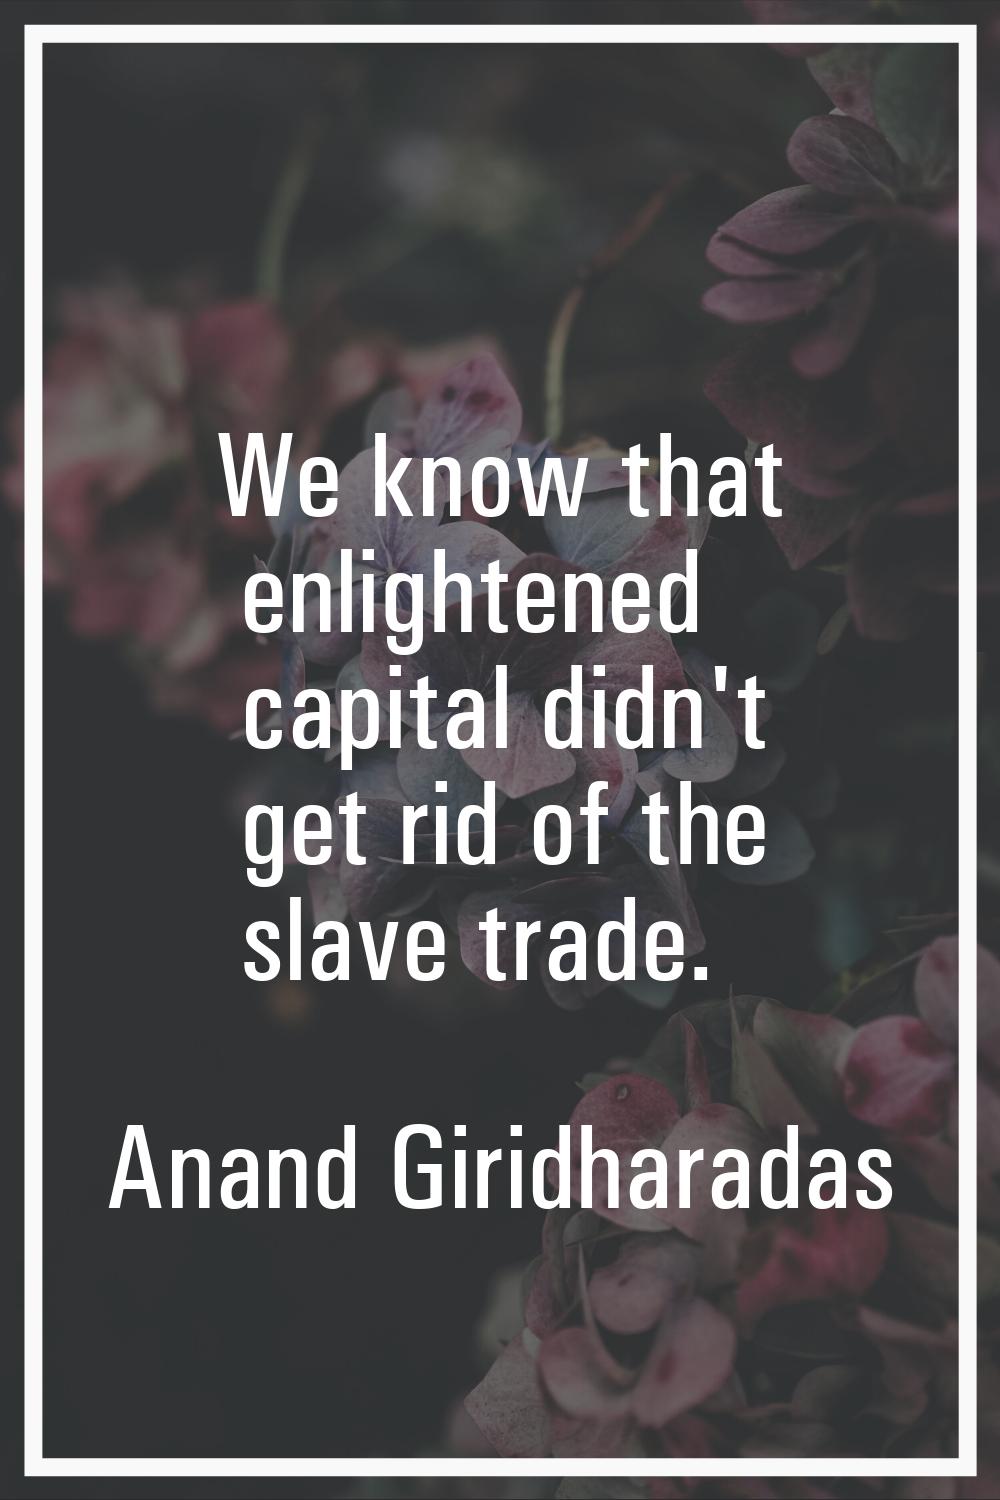 We know that enlightened capital didn't get rid of the slave trade.